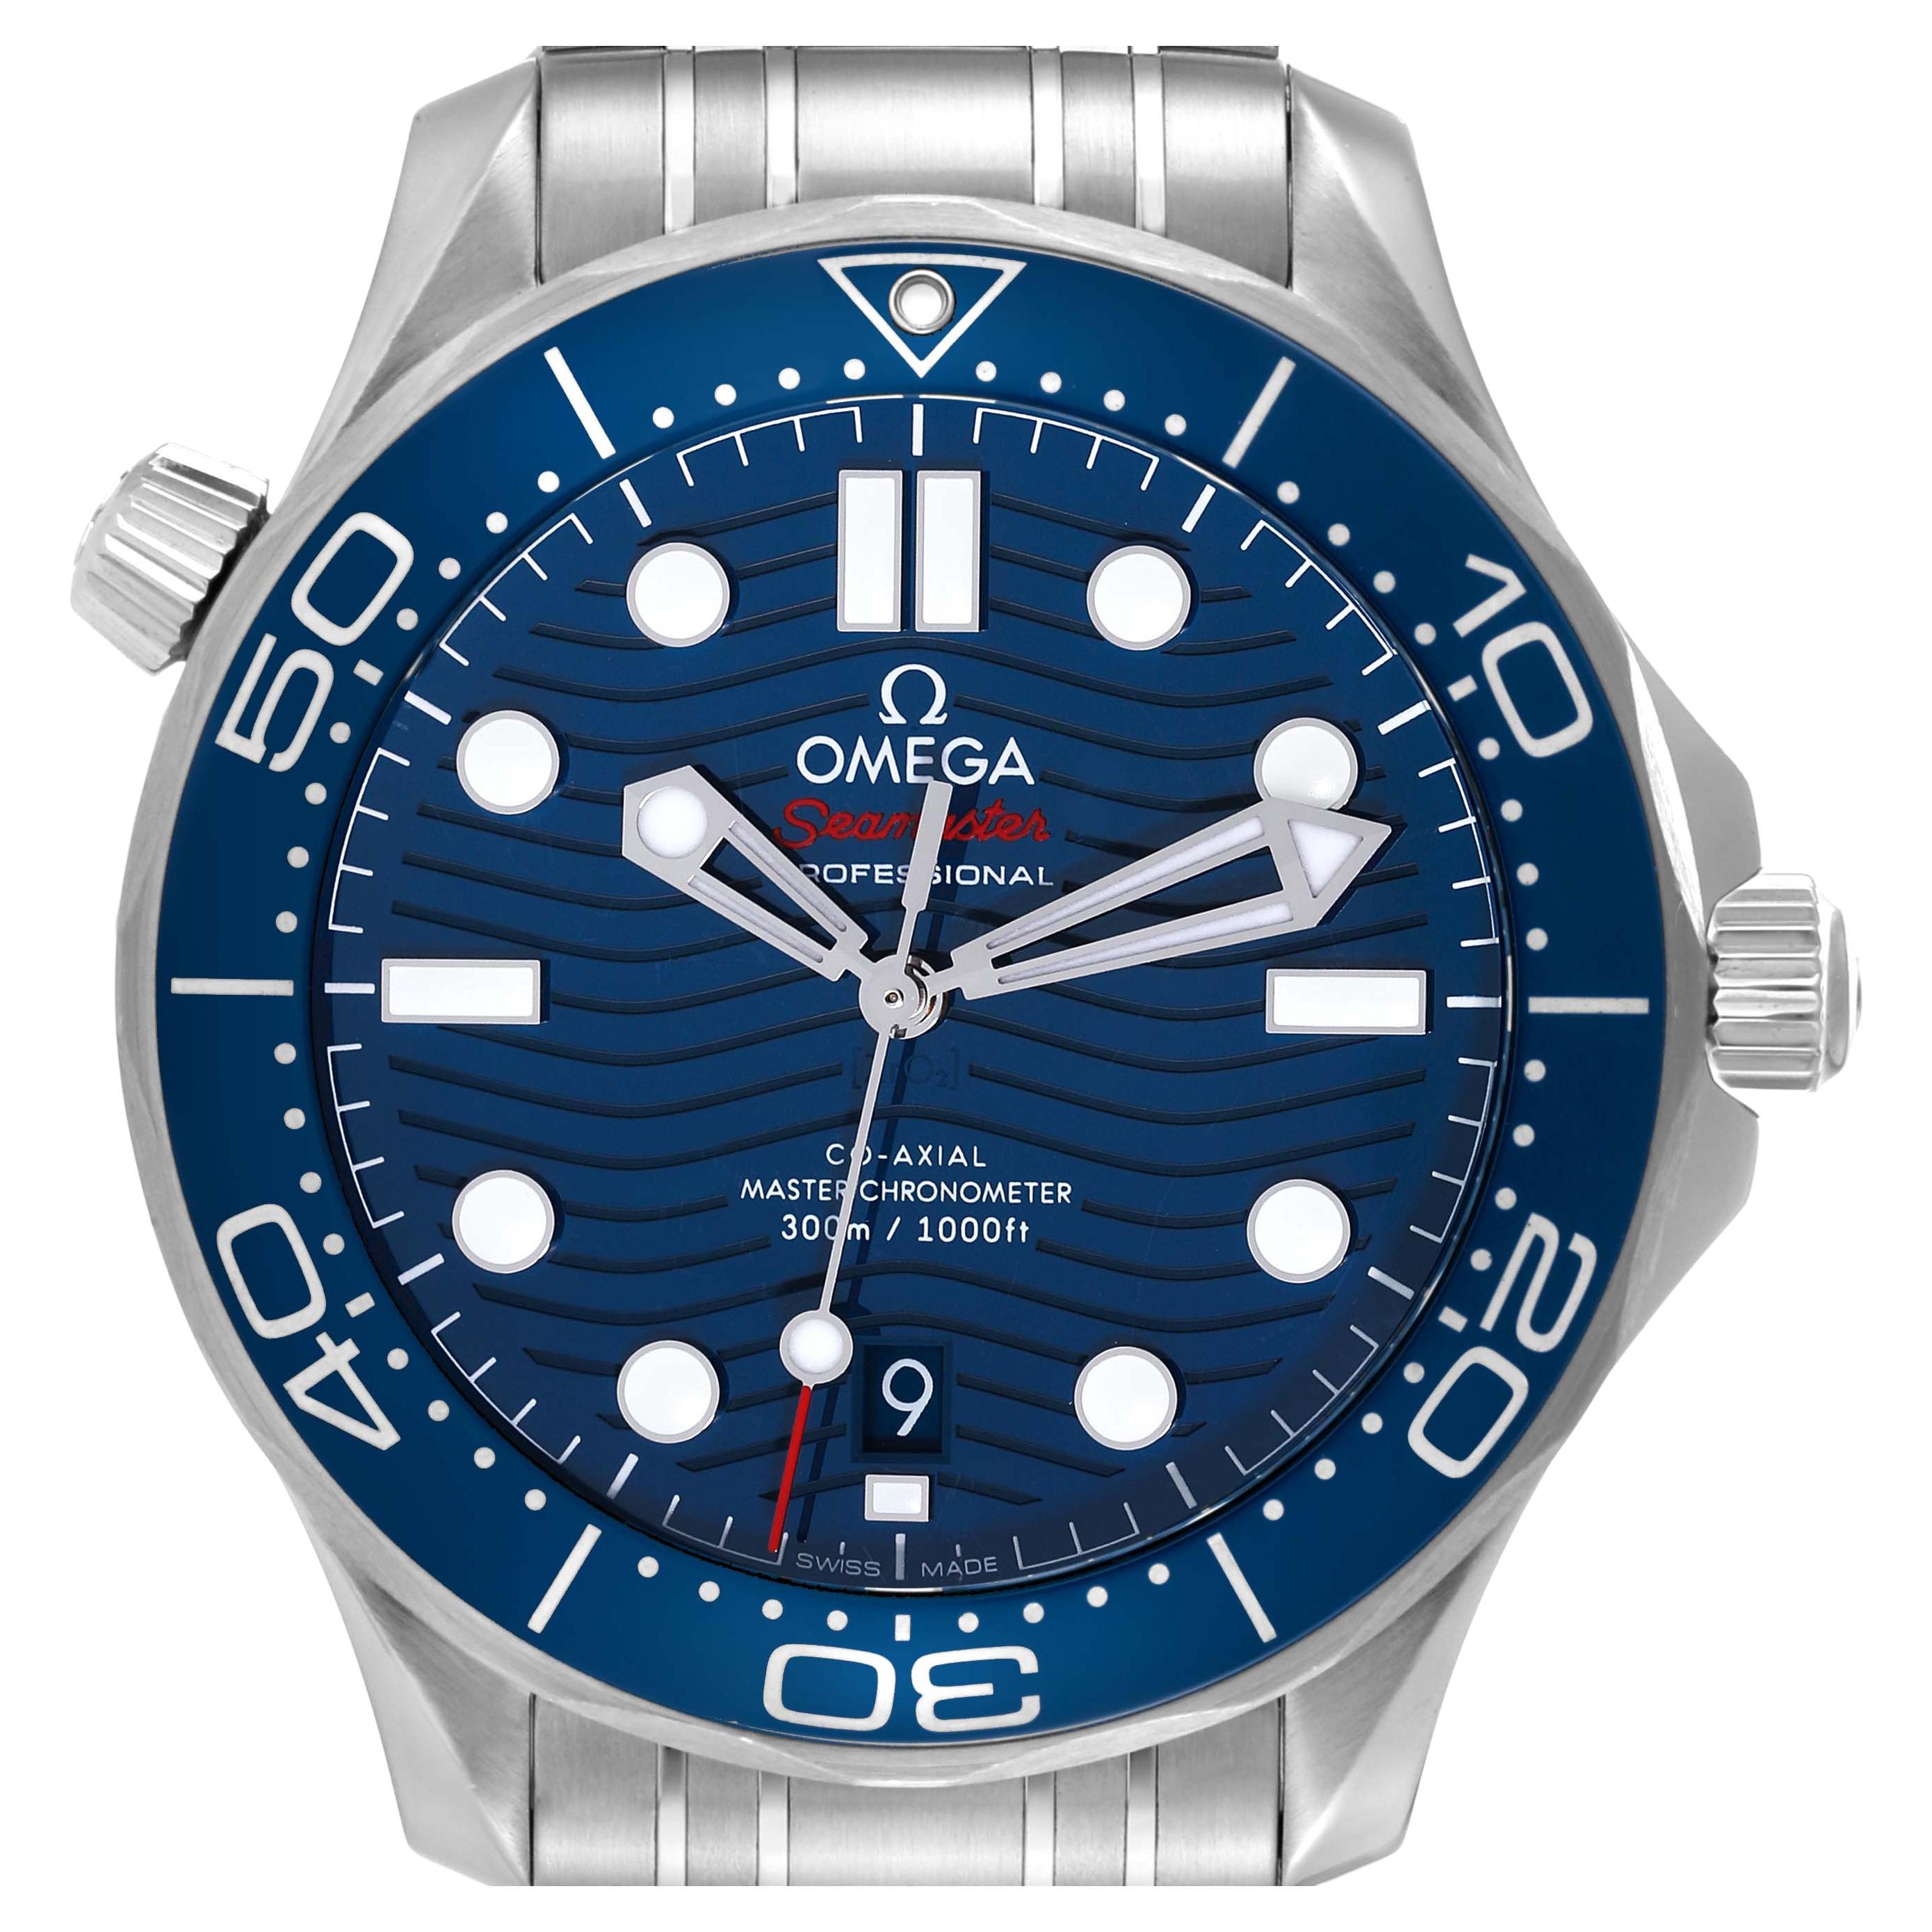 Omega Seamaster Diver Blue Dial Steel Mens Watch 210.30.42.20.03.001 Box Card